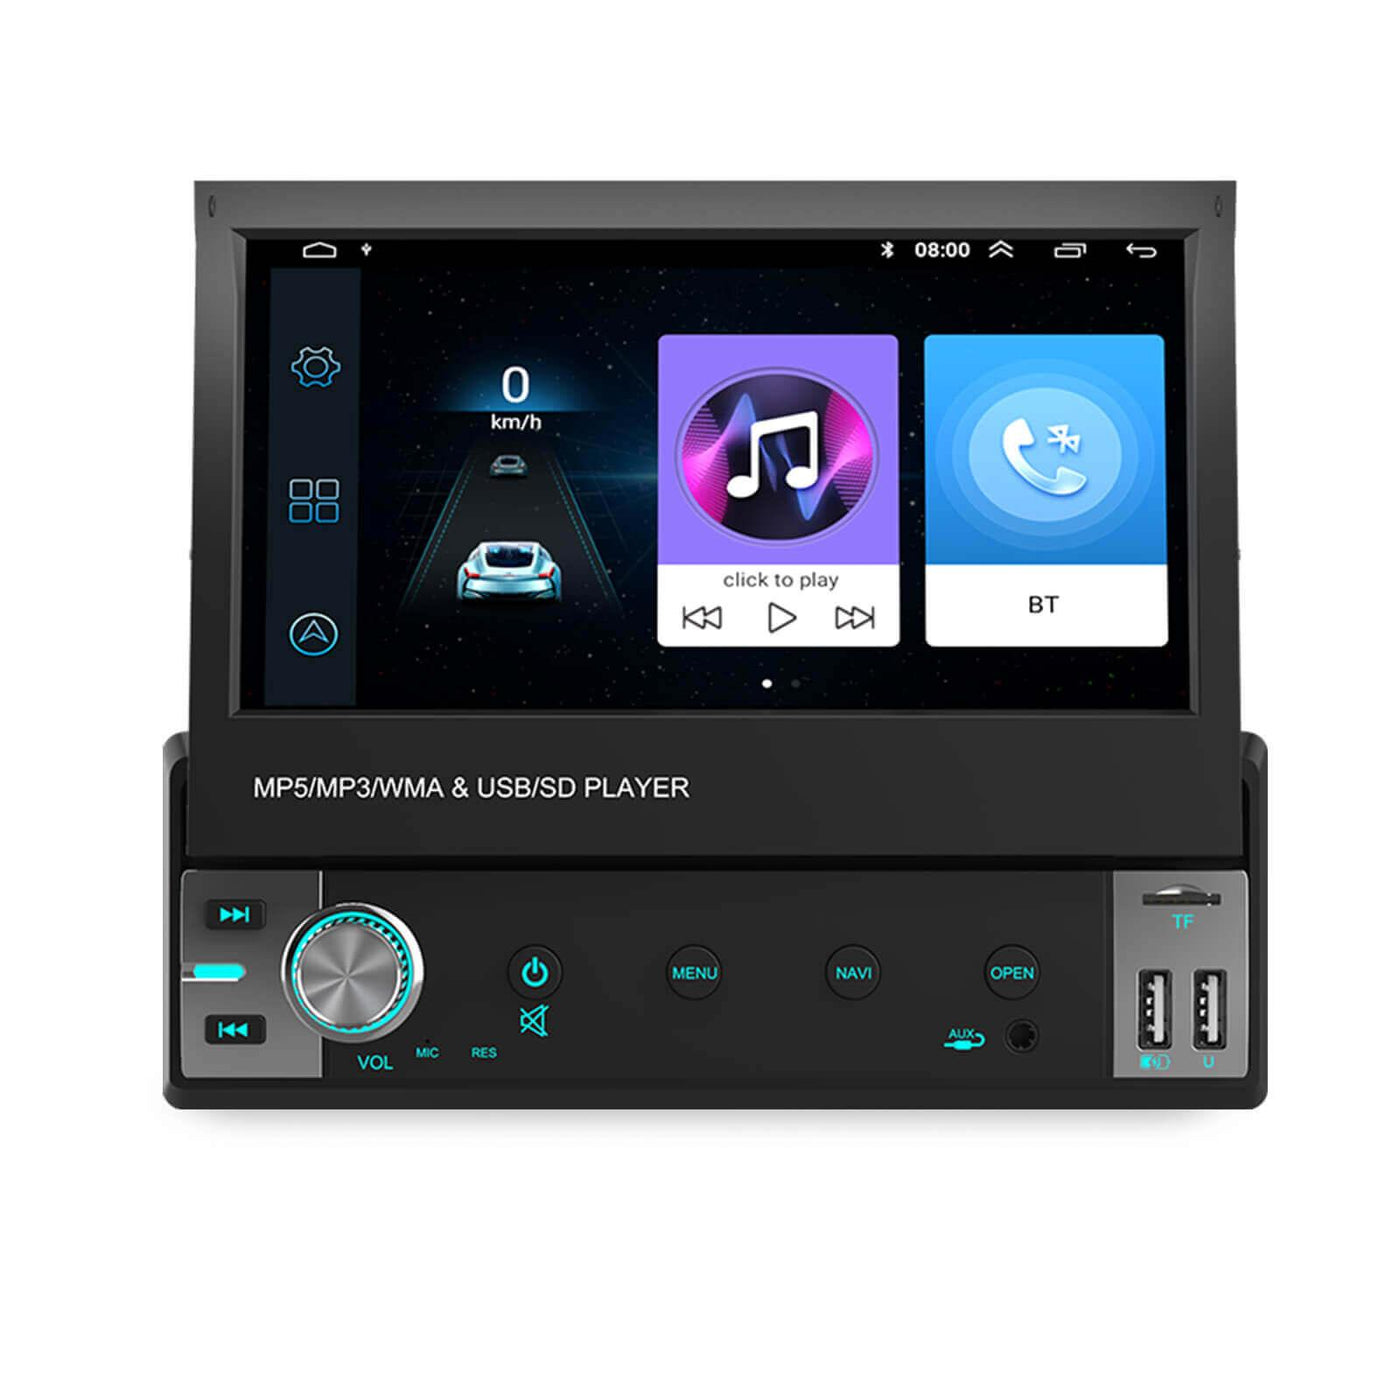 Car Stereo in Dash Single DIN 7 inch HD Flip Out Touch Screen Radio GPS Head Unit Support Bluetooth Hands-Free GPS Navigation Mirror Link FM USB SD